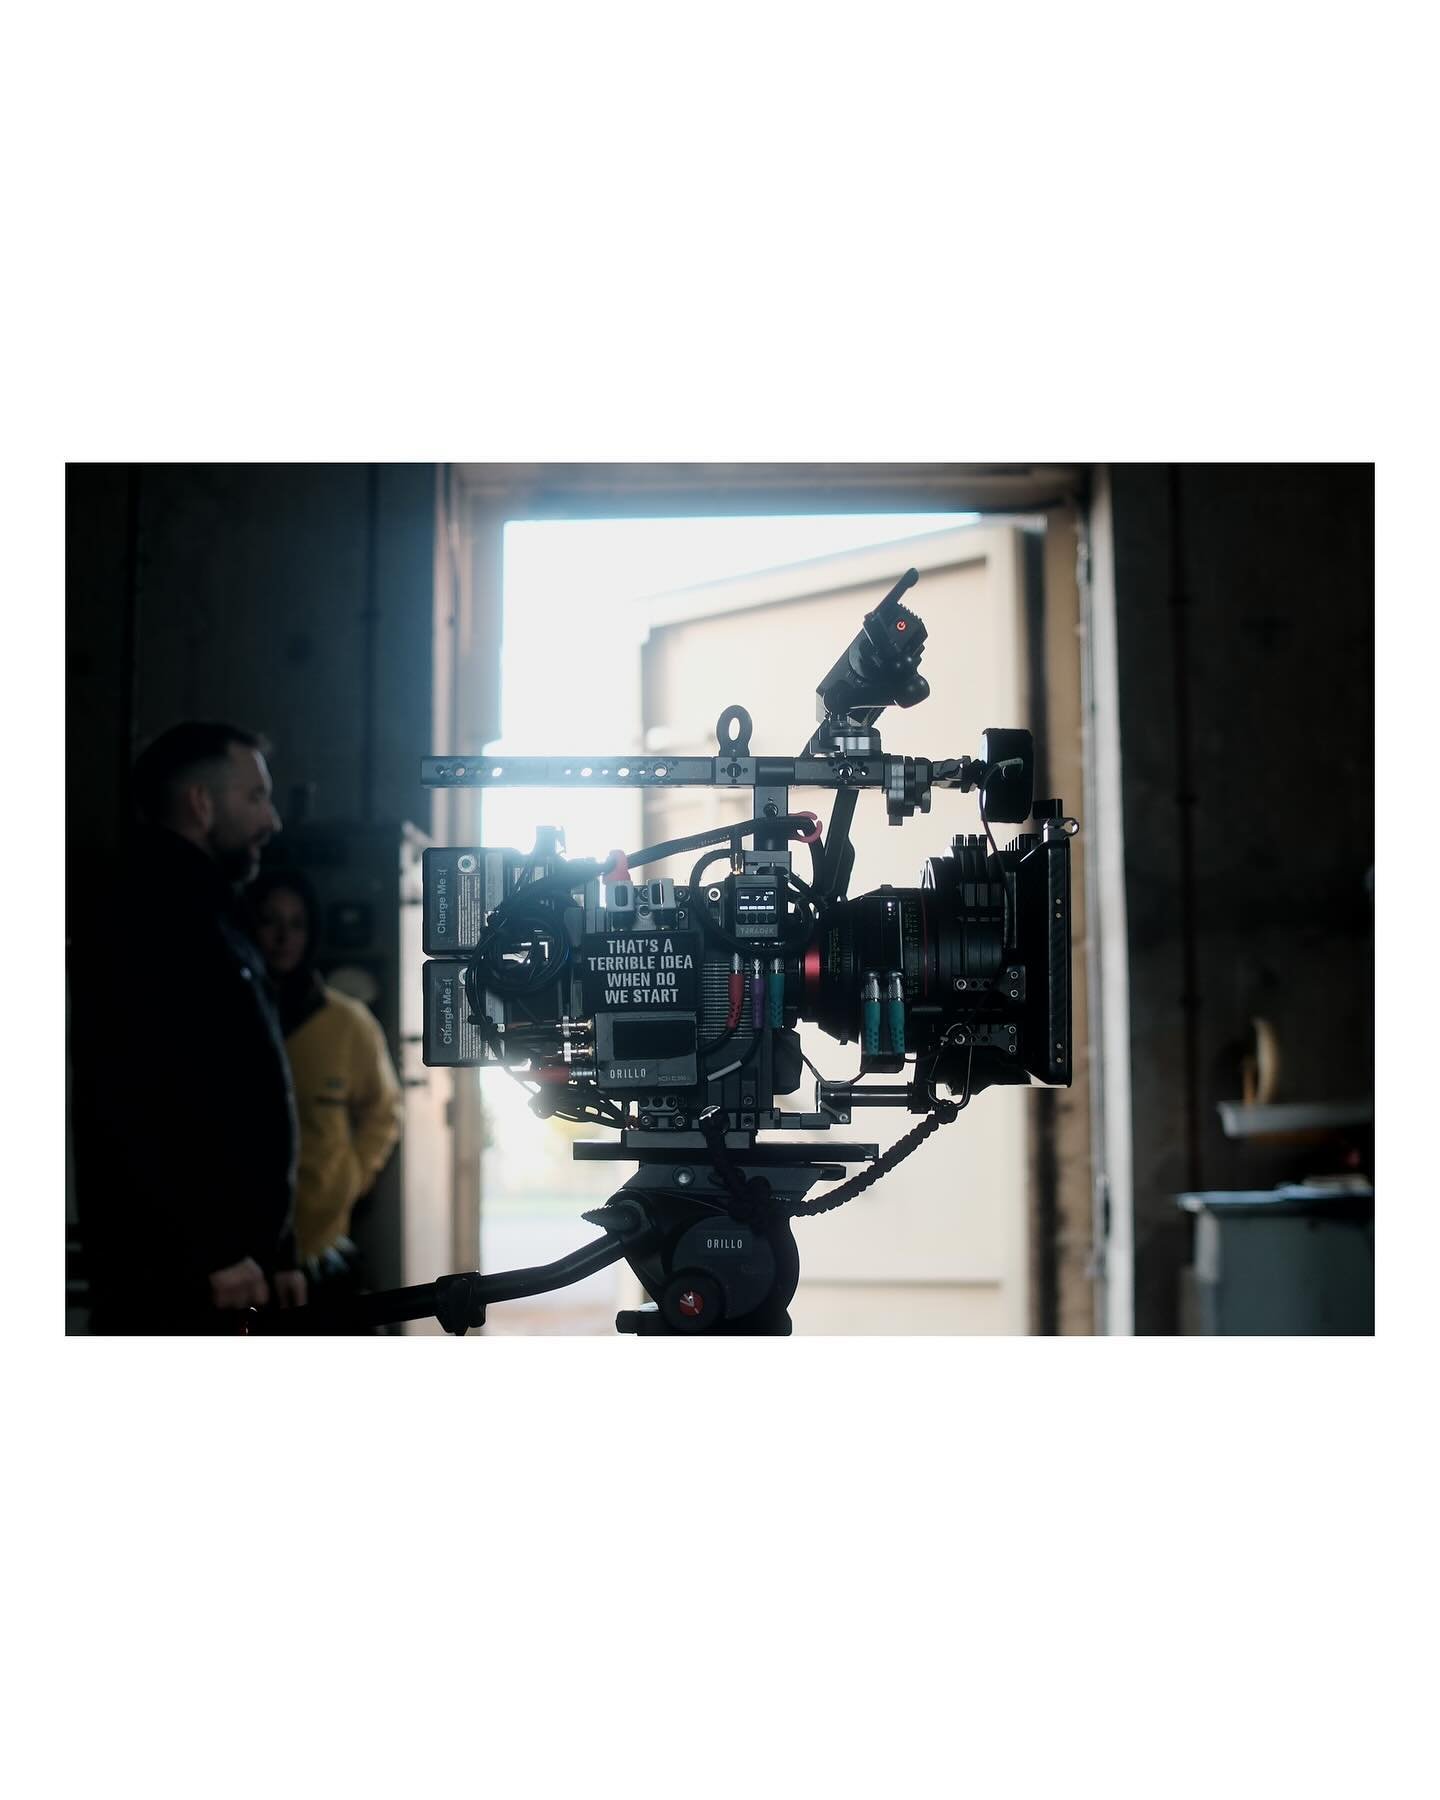 All wrapped on an indie feature with Orillo Films&rsquo; surprisingly well behaved Red Epic Dragon. Sharps for DP @bucky1986 -  @_oscar_bell on the boards 🎬

@ratworksengineering compact handle riser coming in clutch once again